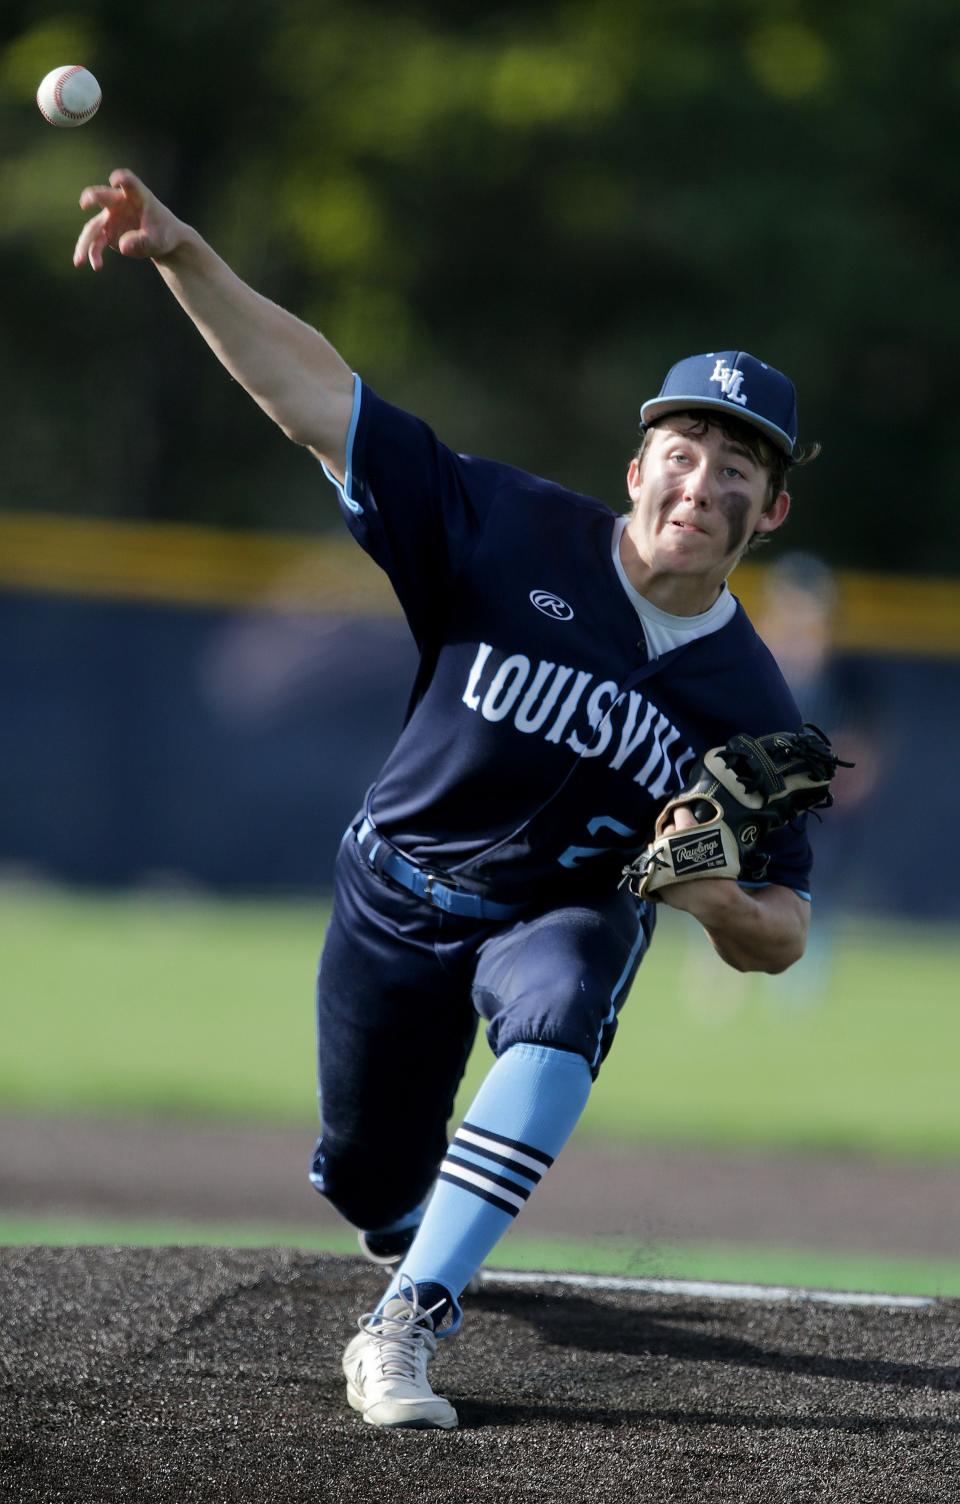 Louisville pitcher Connor Morley delivers a pitch in the fifth inning against Marlington in the Division II district final at Louisville, May 25, 2022.